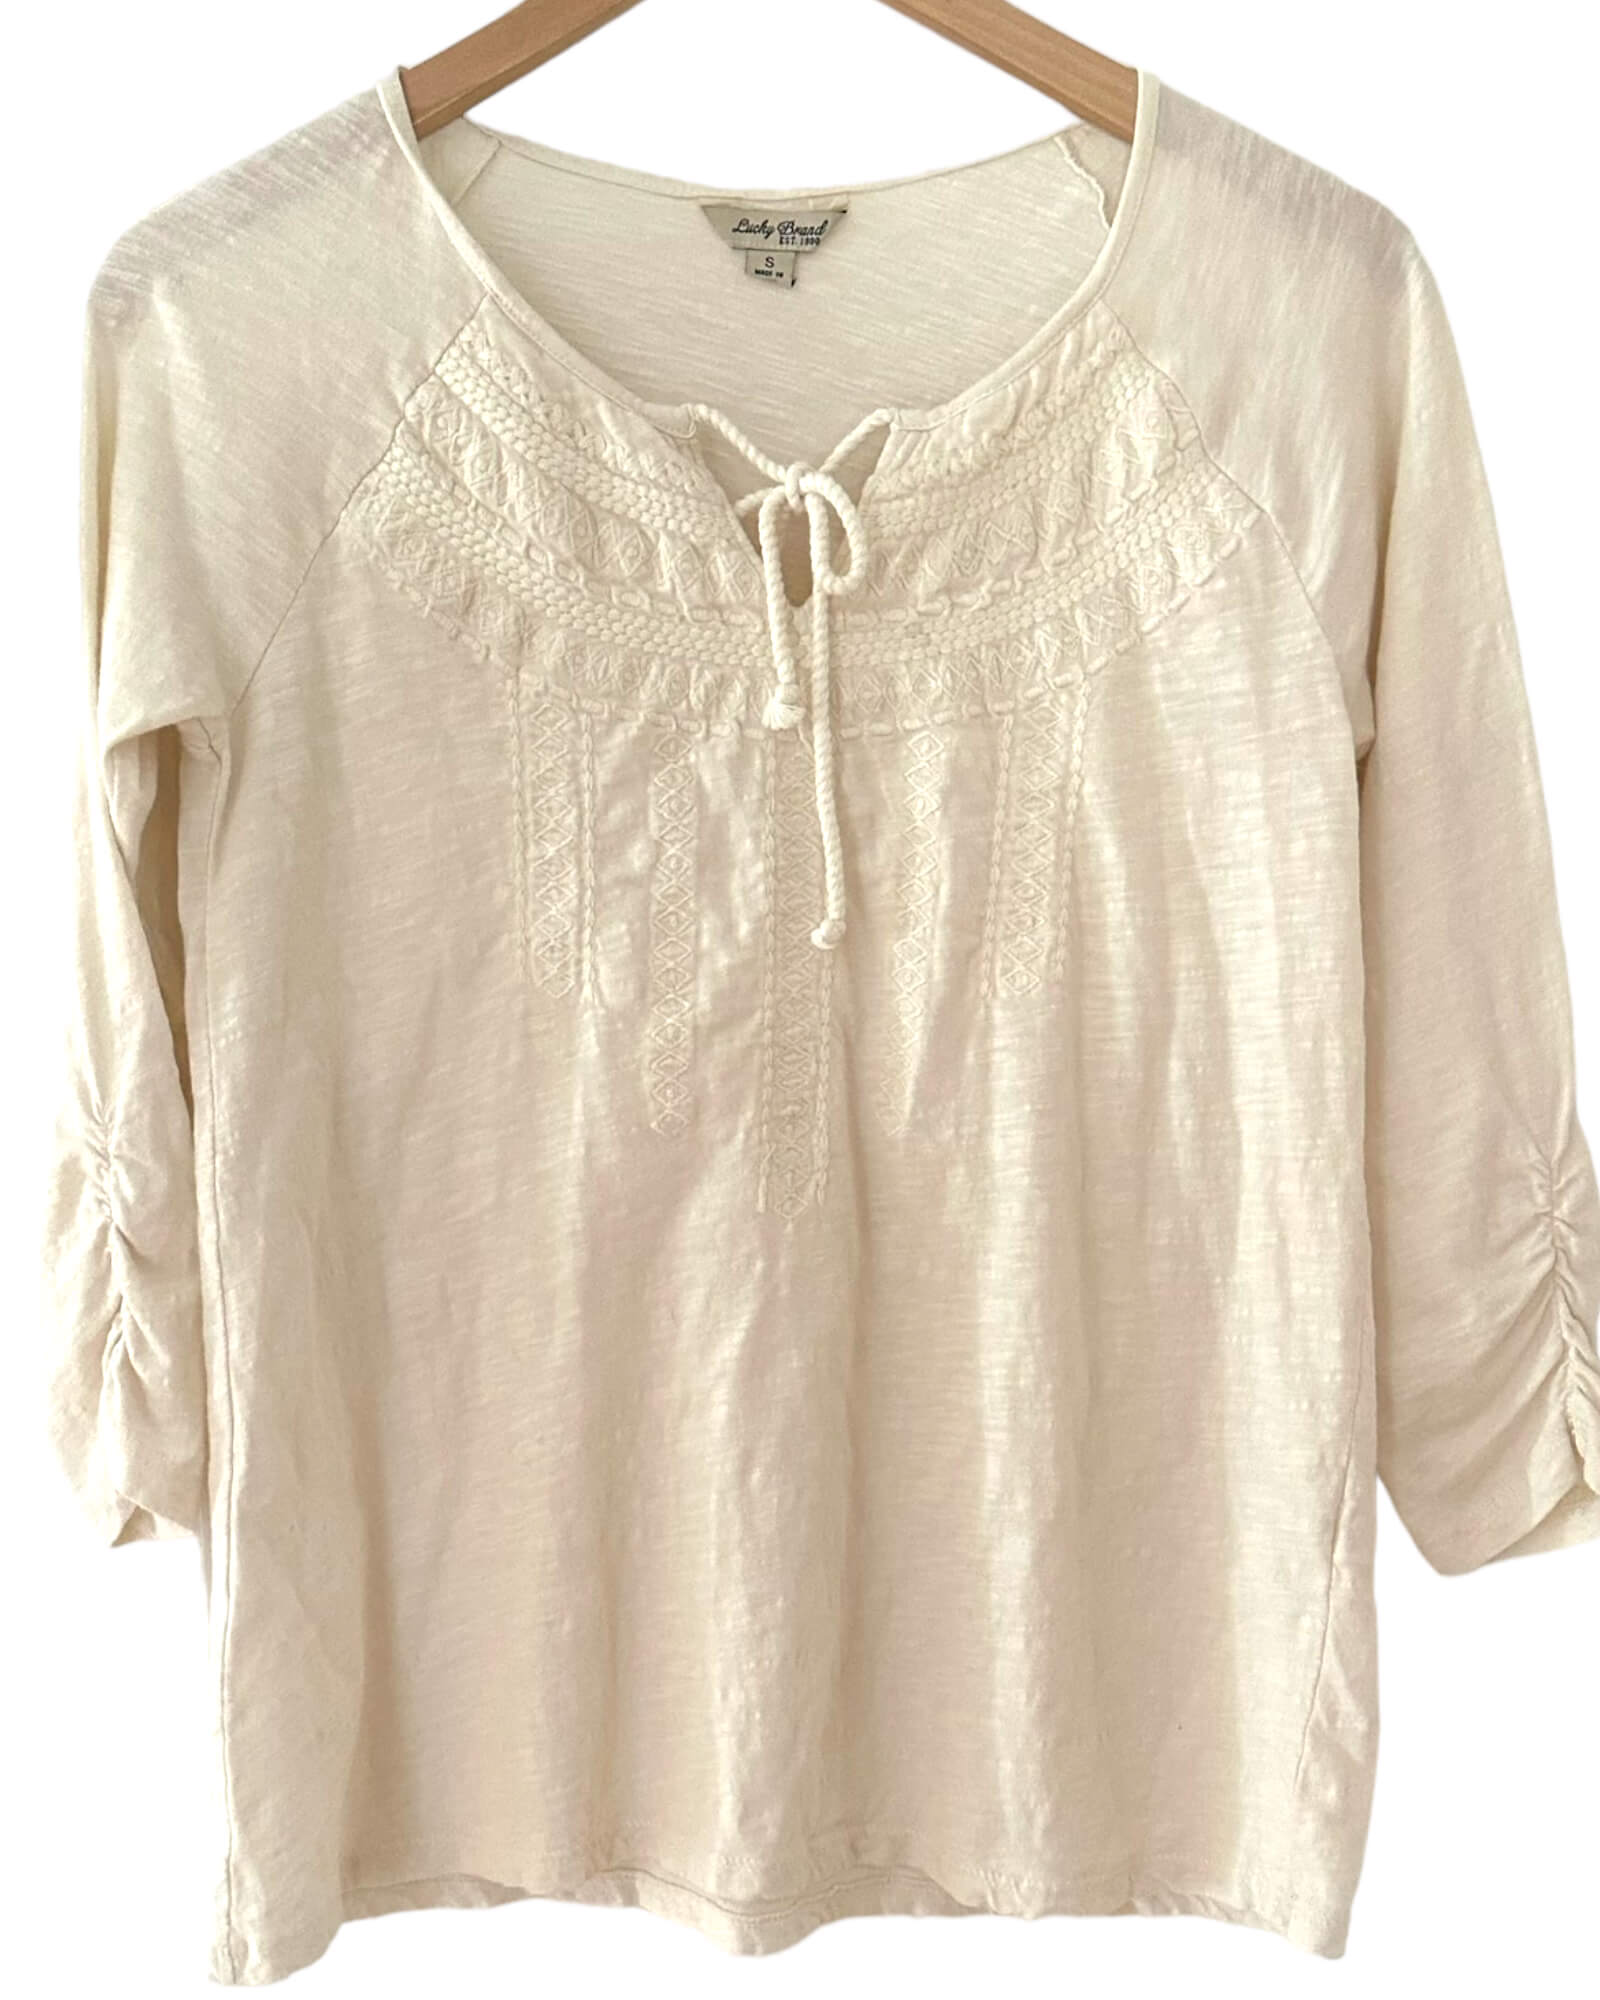 Warm Spring LUCKY BRAND embroidered ivory top